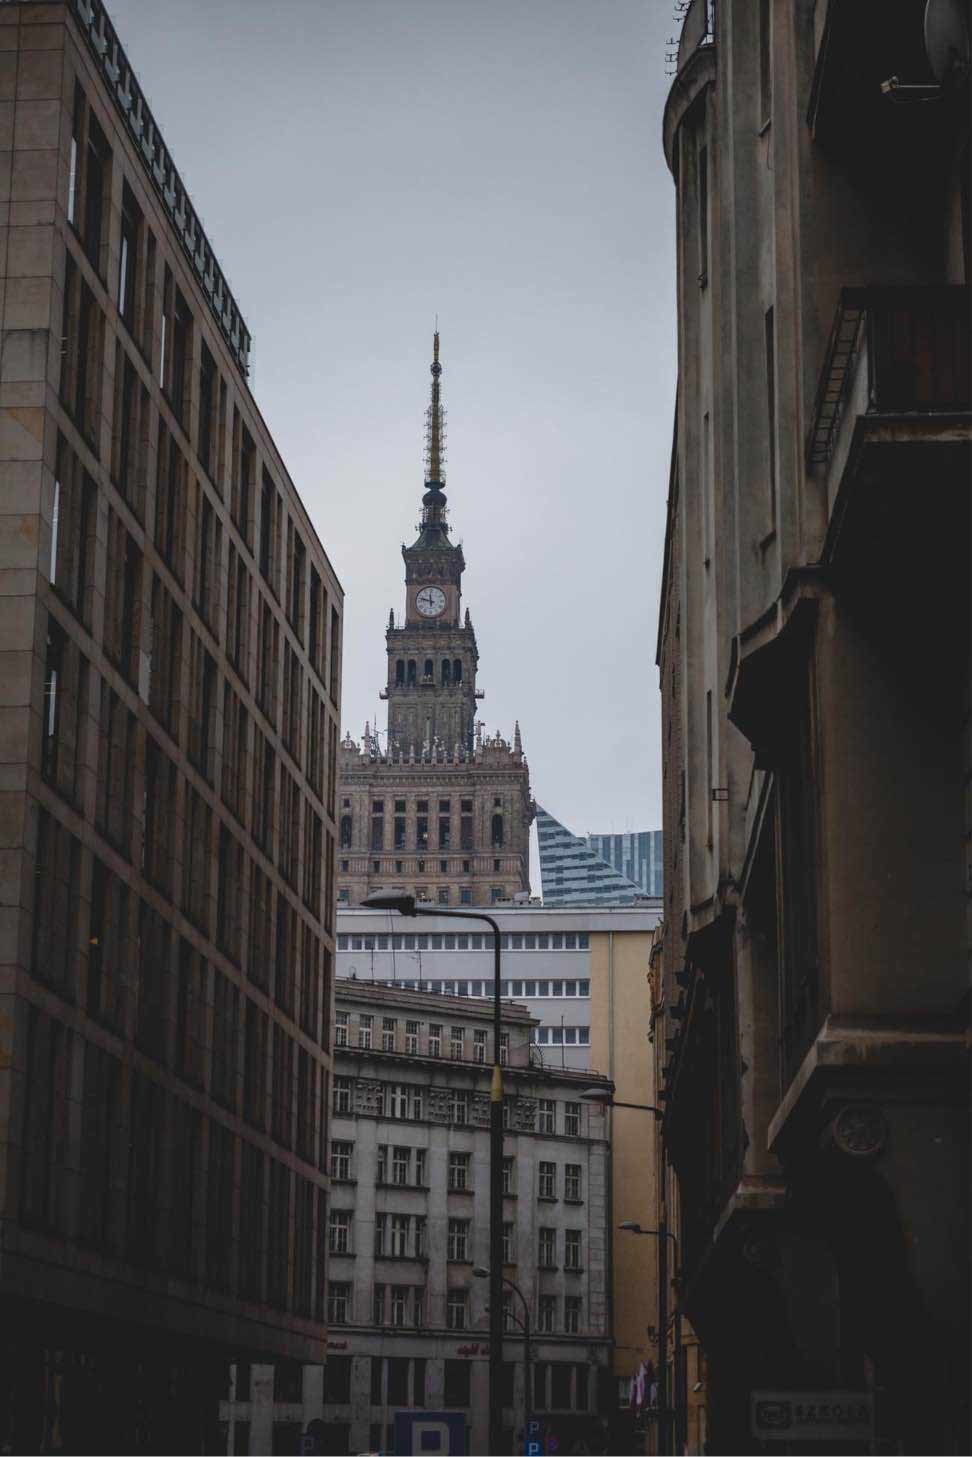 Warsaw view, a photo made by Baltazar.